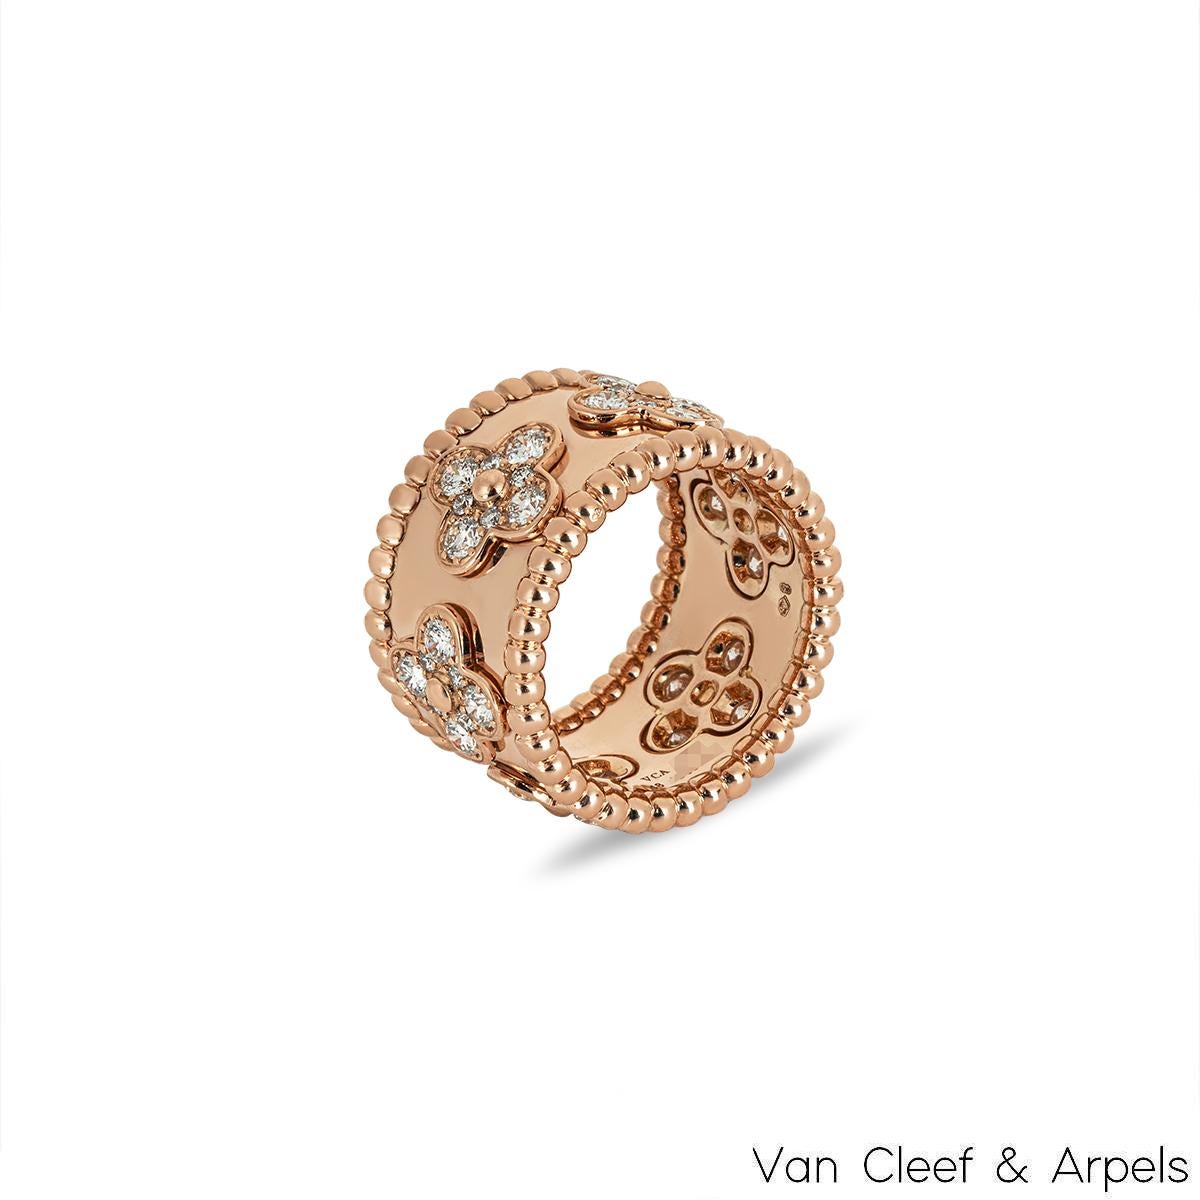 A beautiful 18k rose gold ring by Van Cleef & Arpels from the Perlée Clovers collection. The ring features 7 four leaf clover motifs, each set with 8 round brilliant cut diamonds. There are a total of 56 diamonds totaling approximately 1.49ct. The